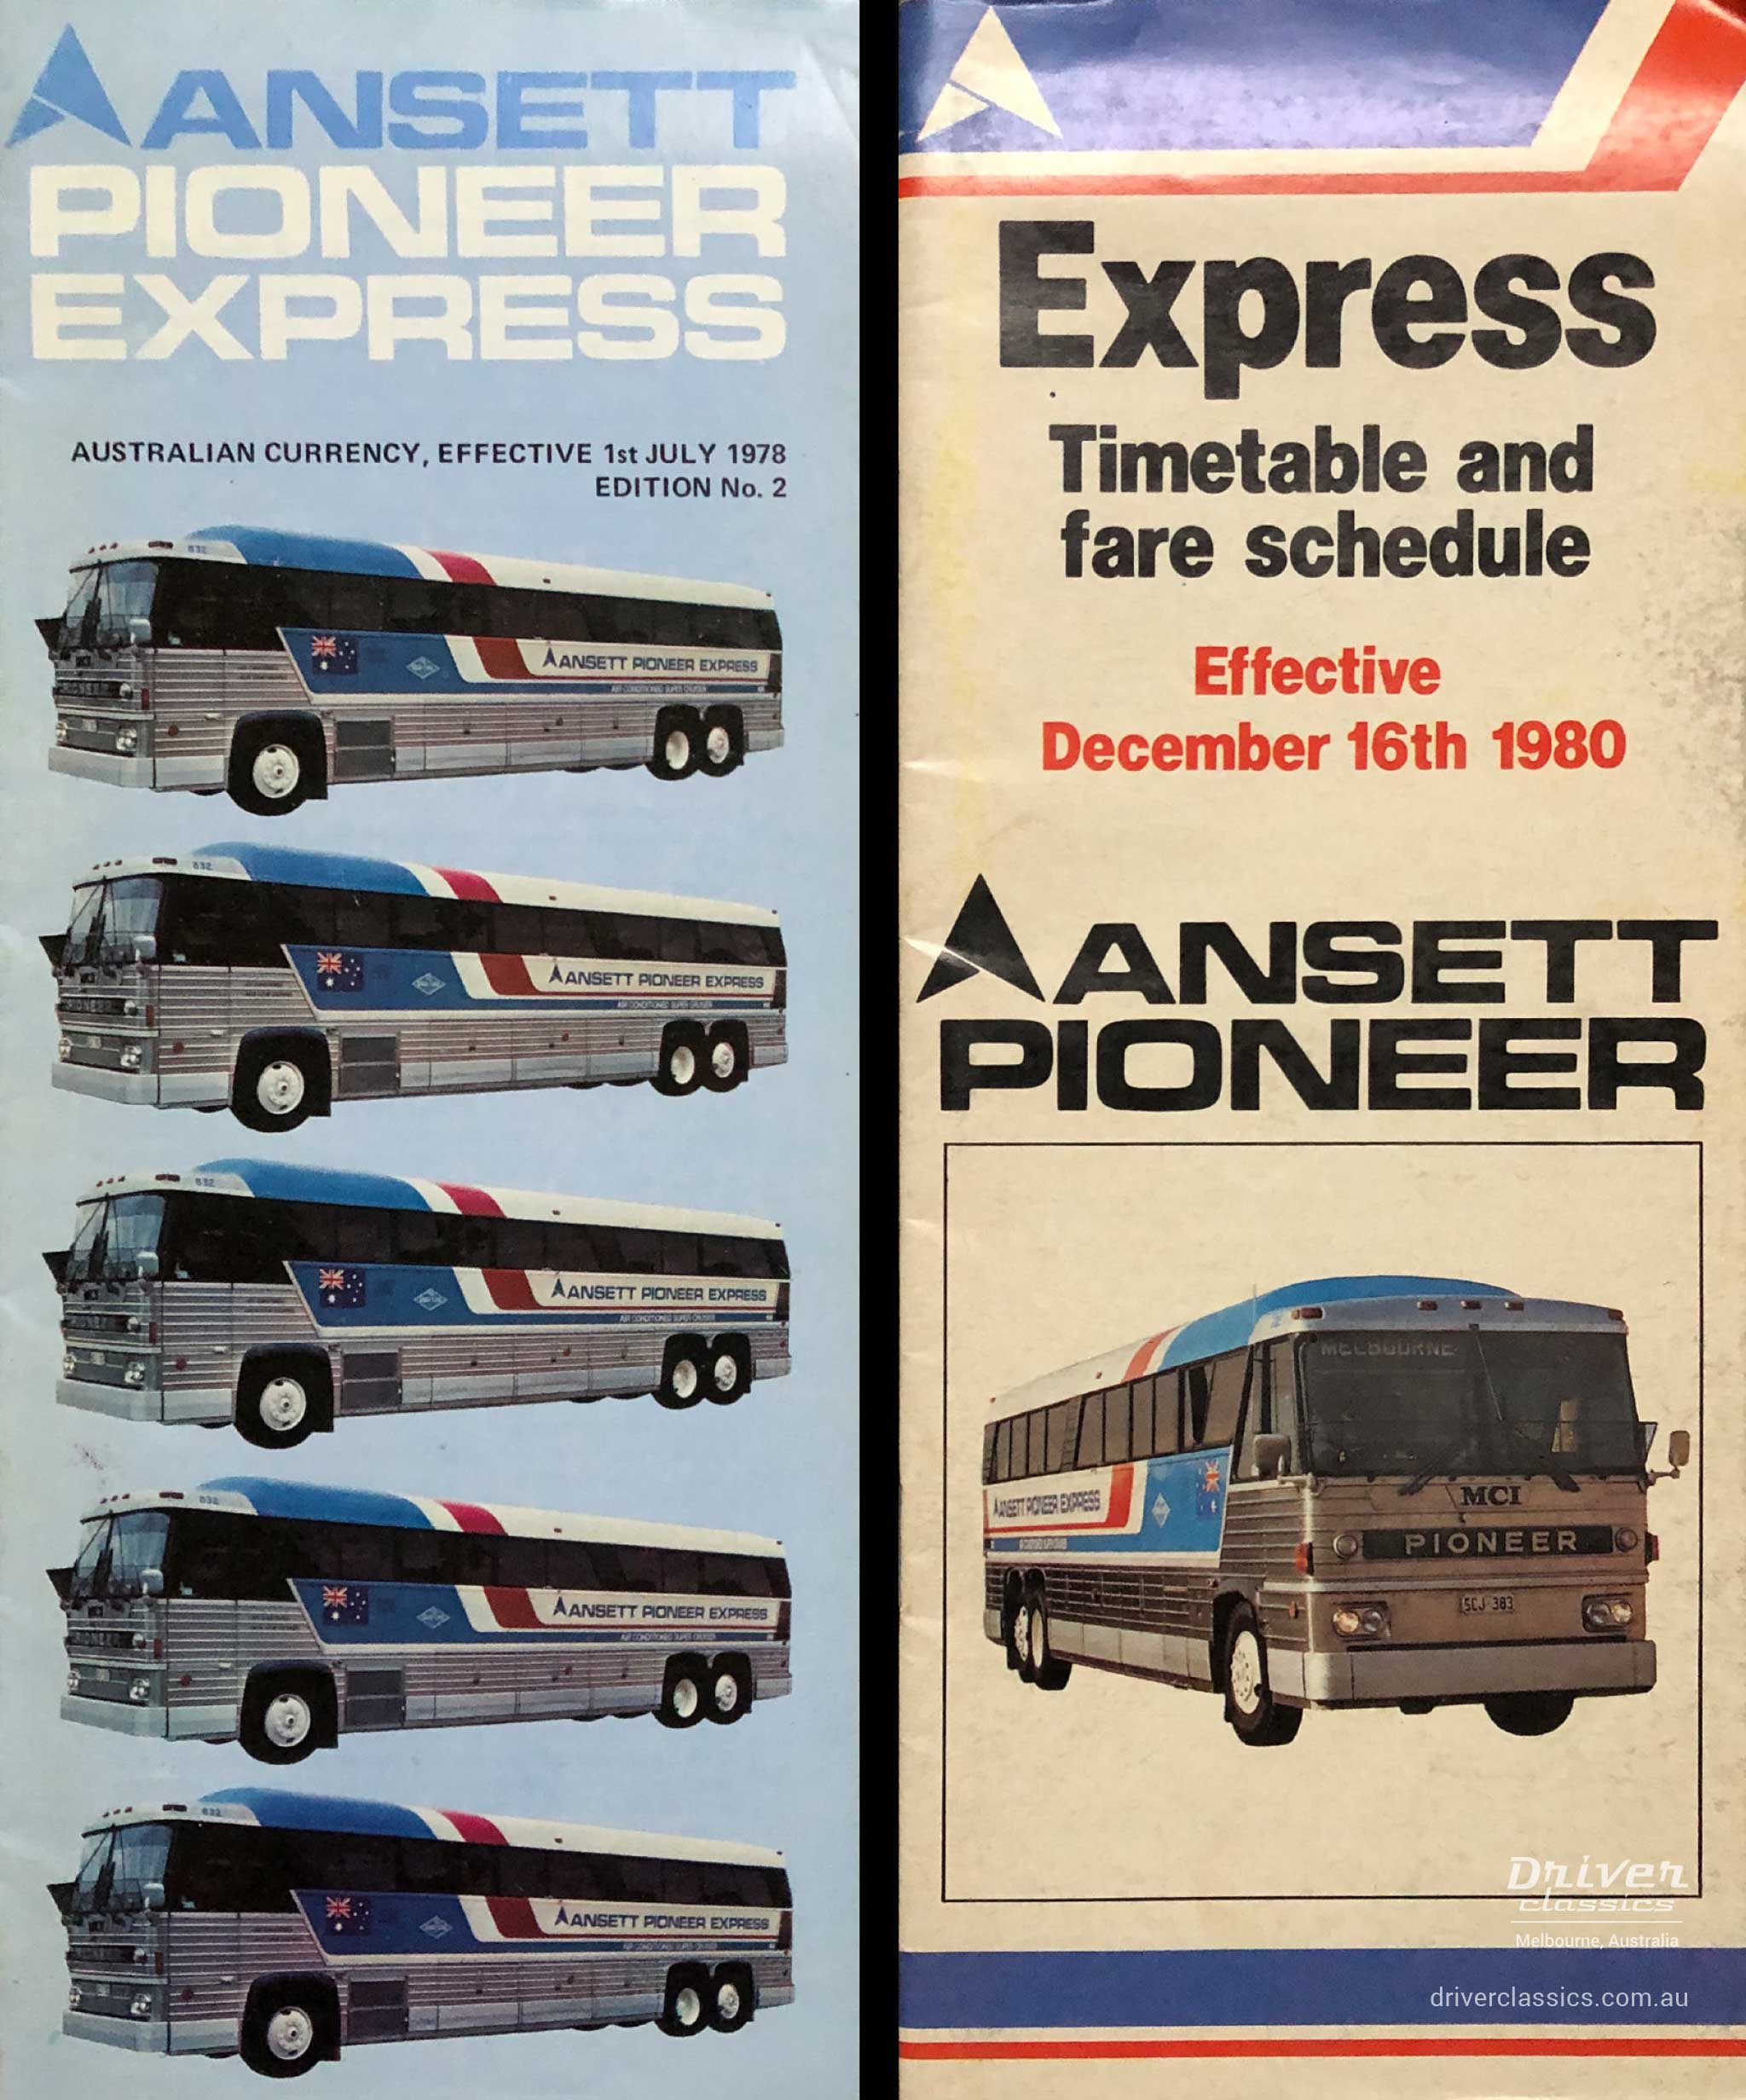 Ansett Pioneer Express timetables from 1978 and 1980 featuring MCI MC8 bus.